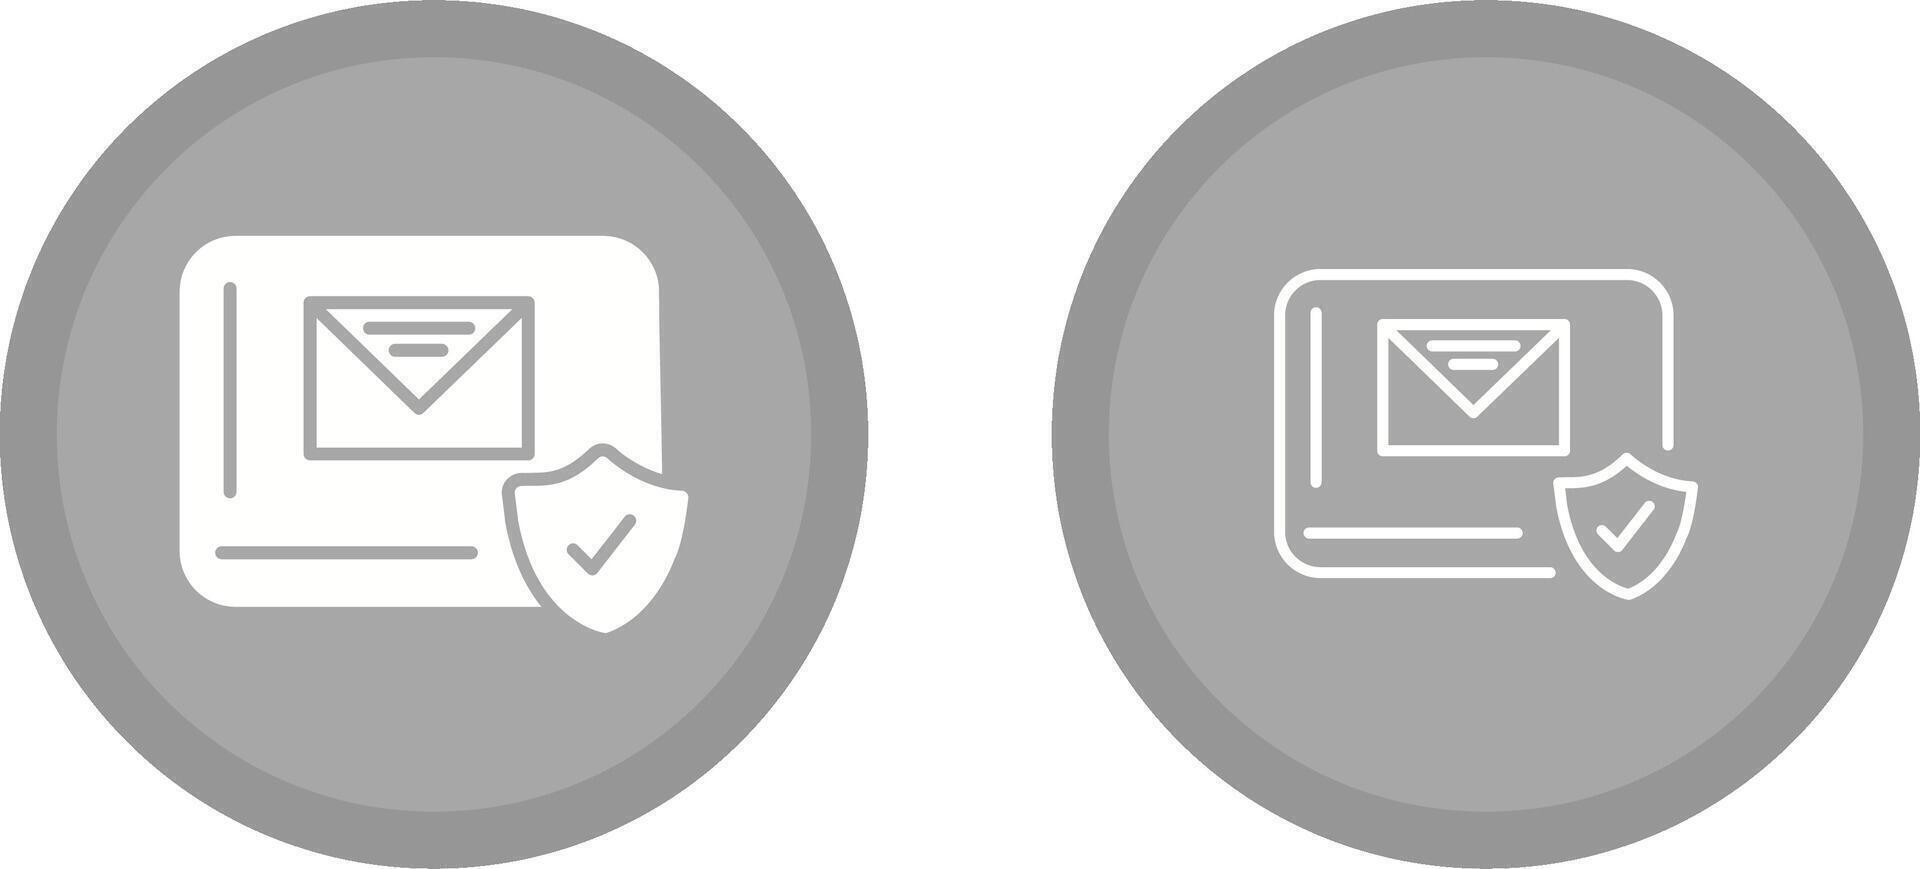 Mail Protection Vector Icon